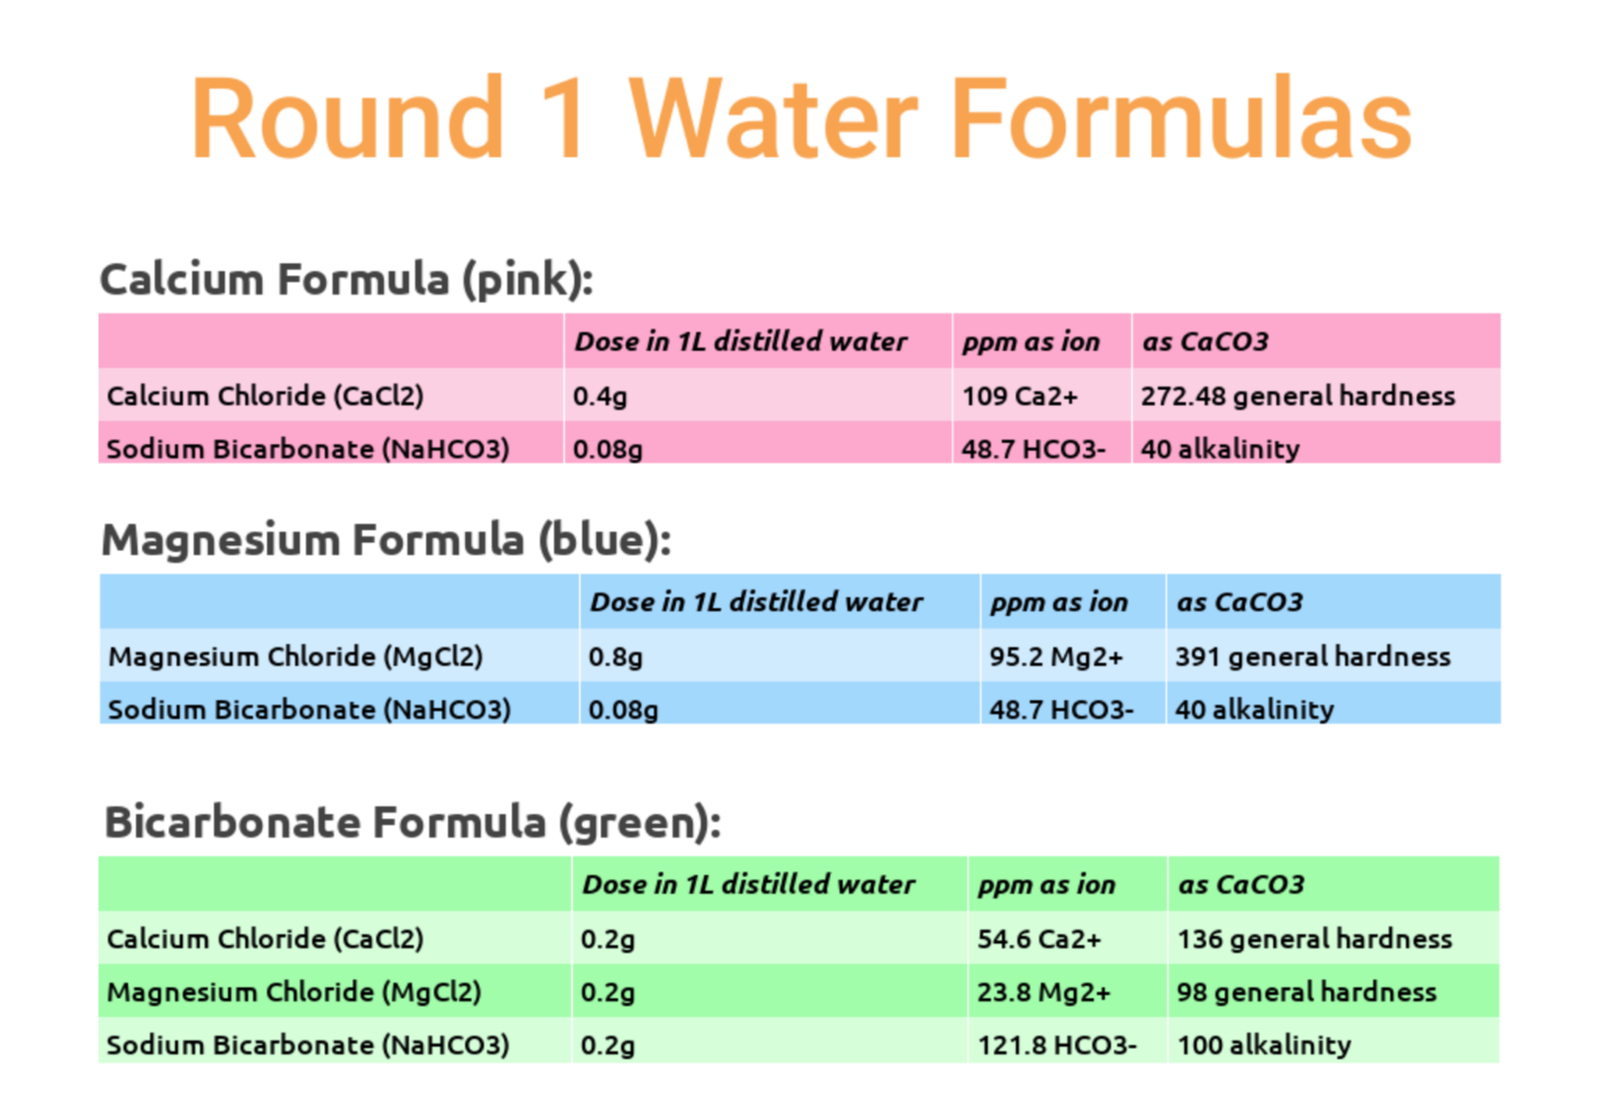 testing coffee water with different mineral formulas